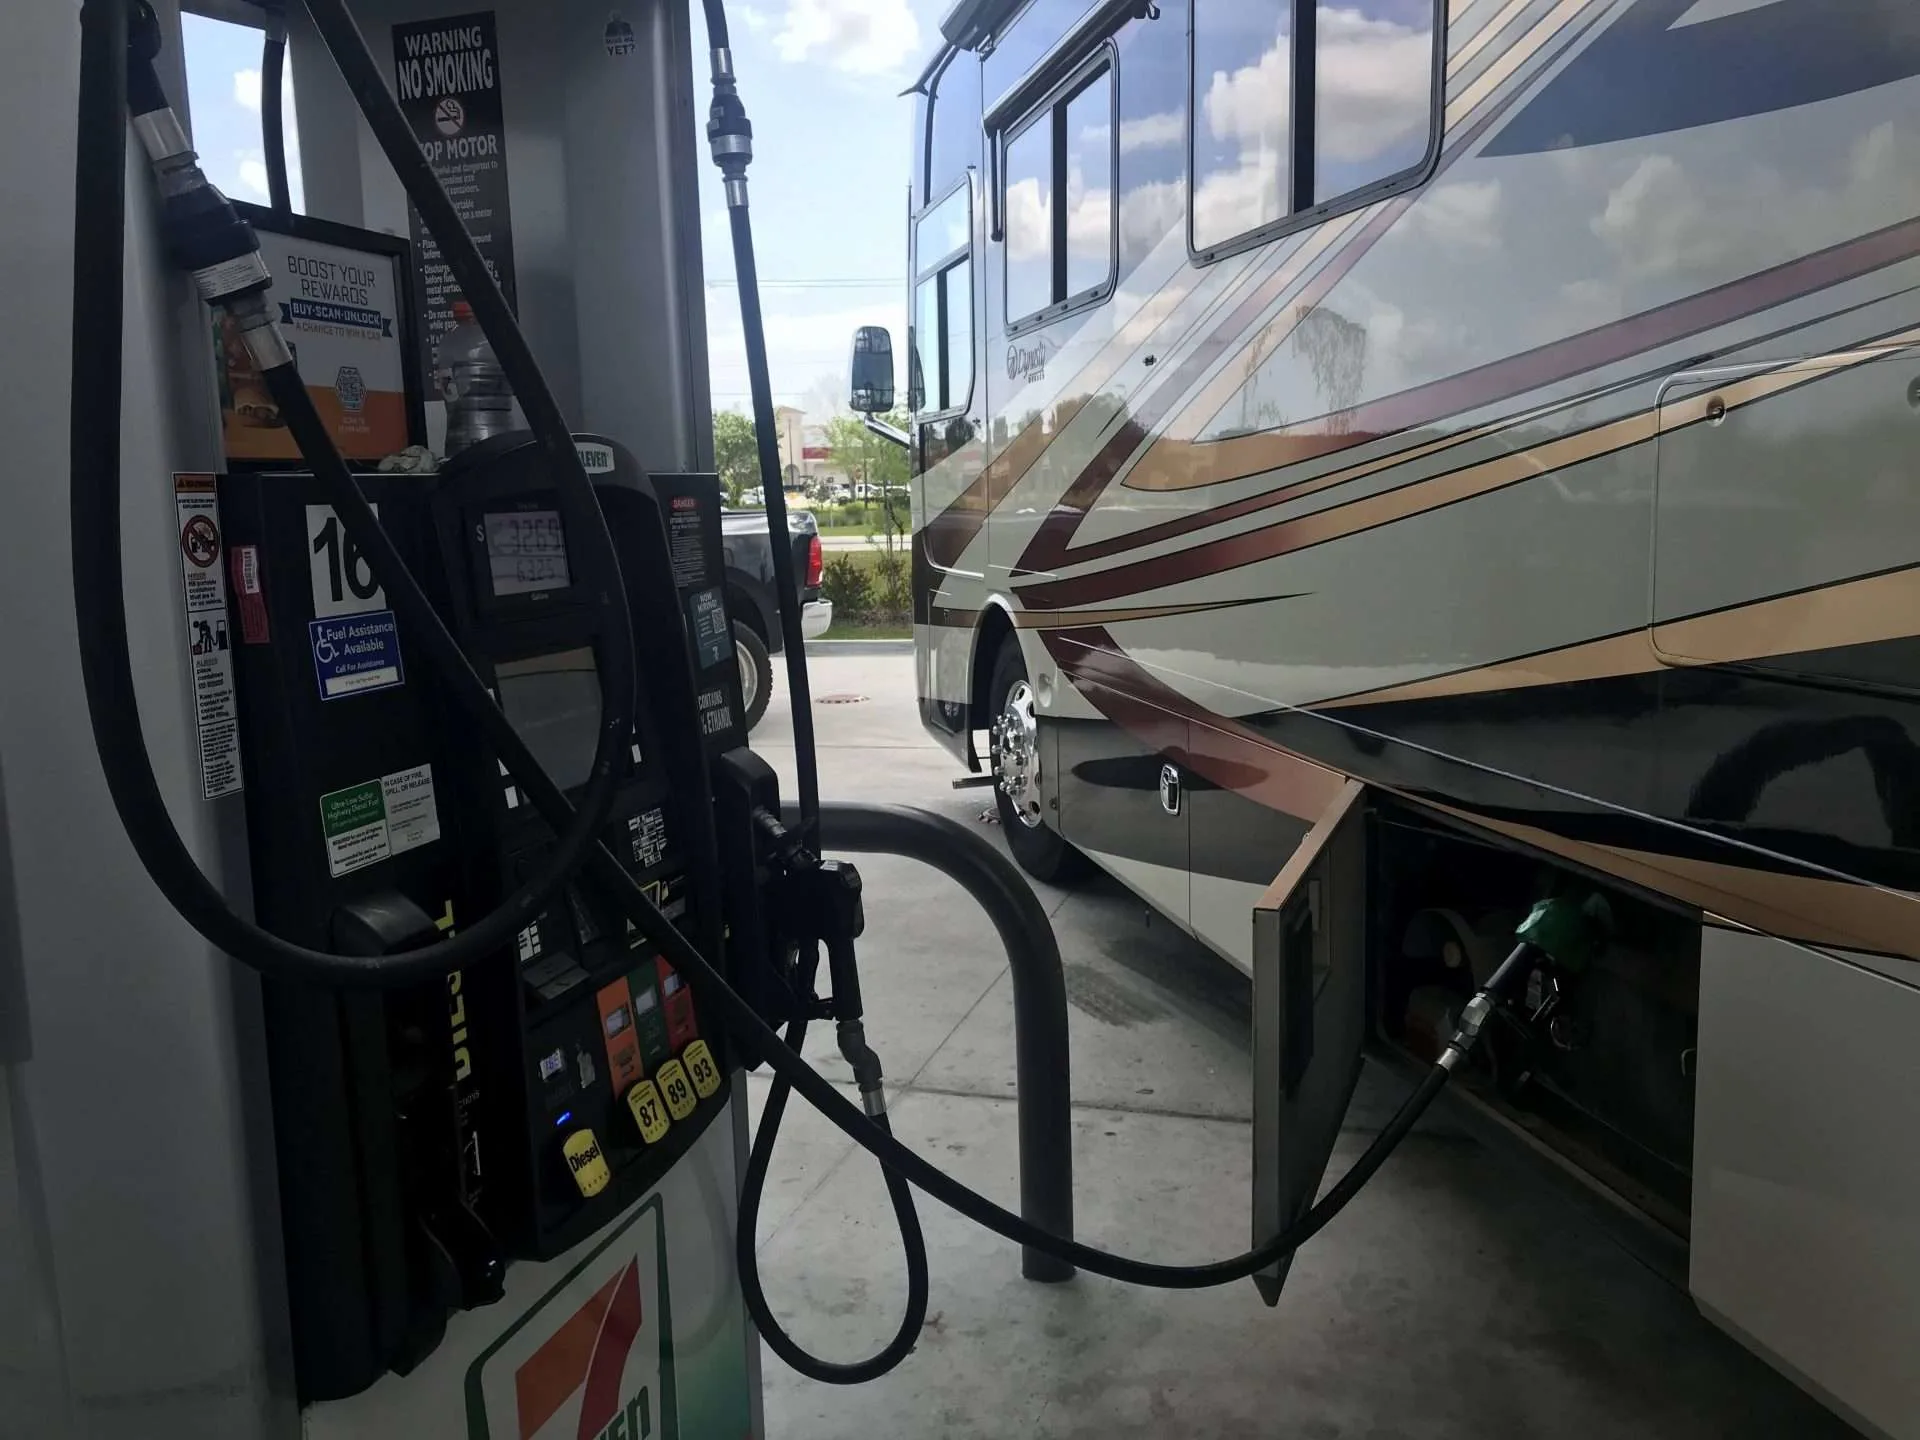 Motorhome parked at gas pump refueling.